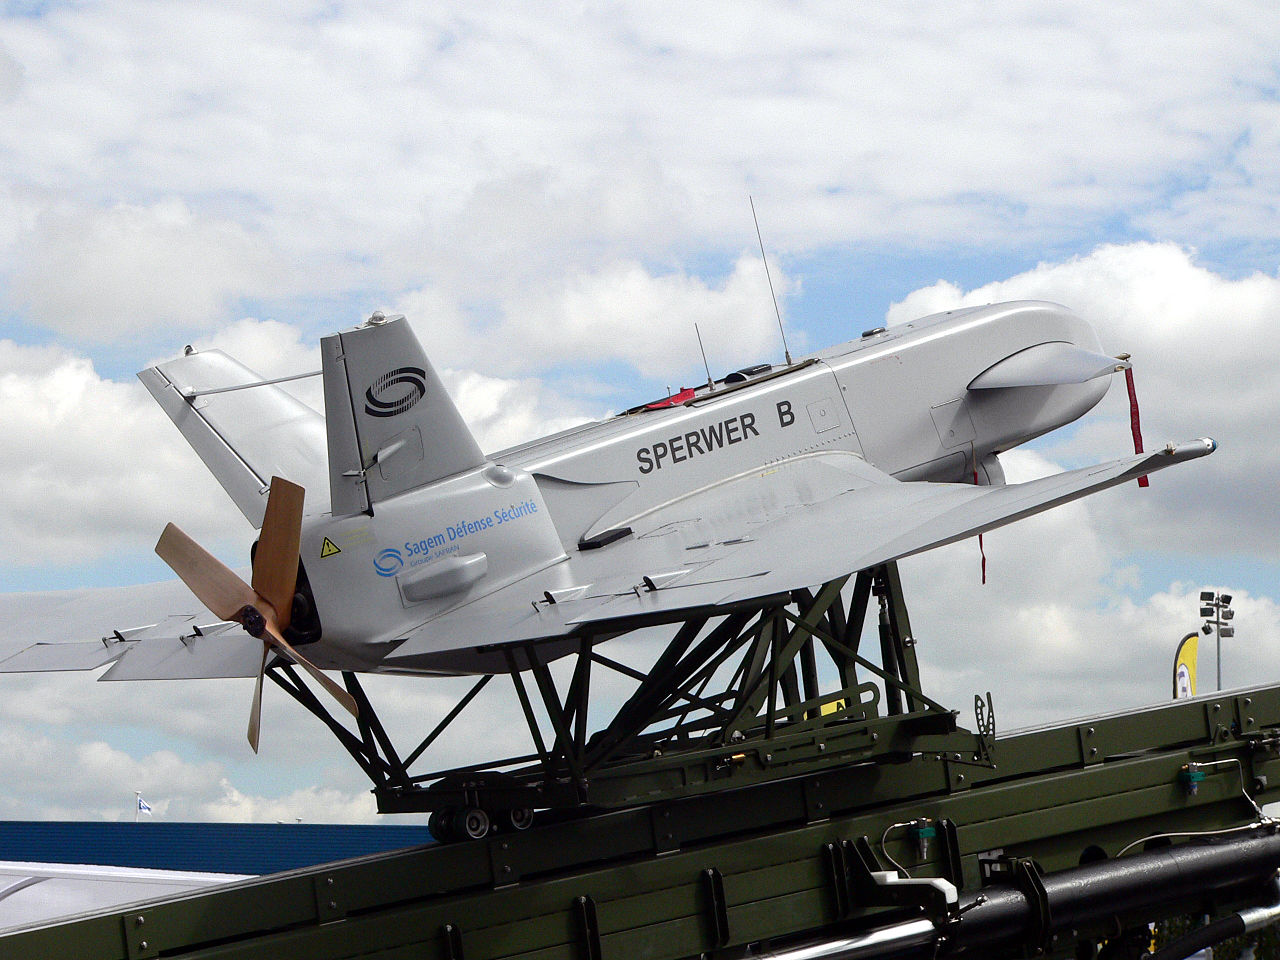 Le Sperwer B, un drone made in France